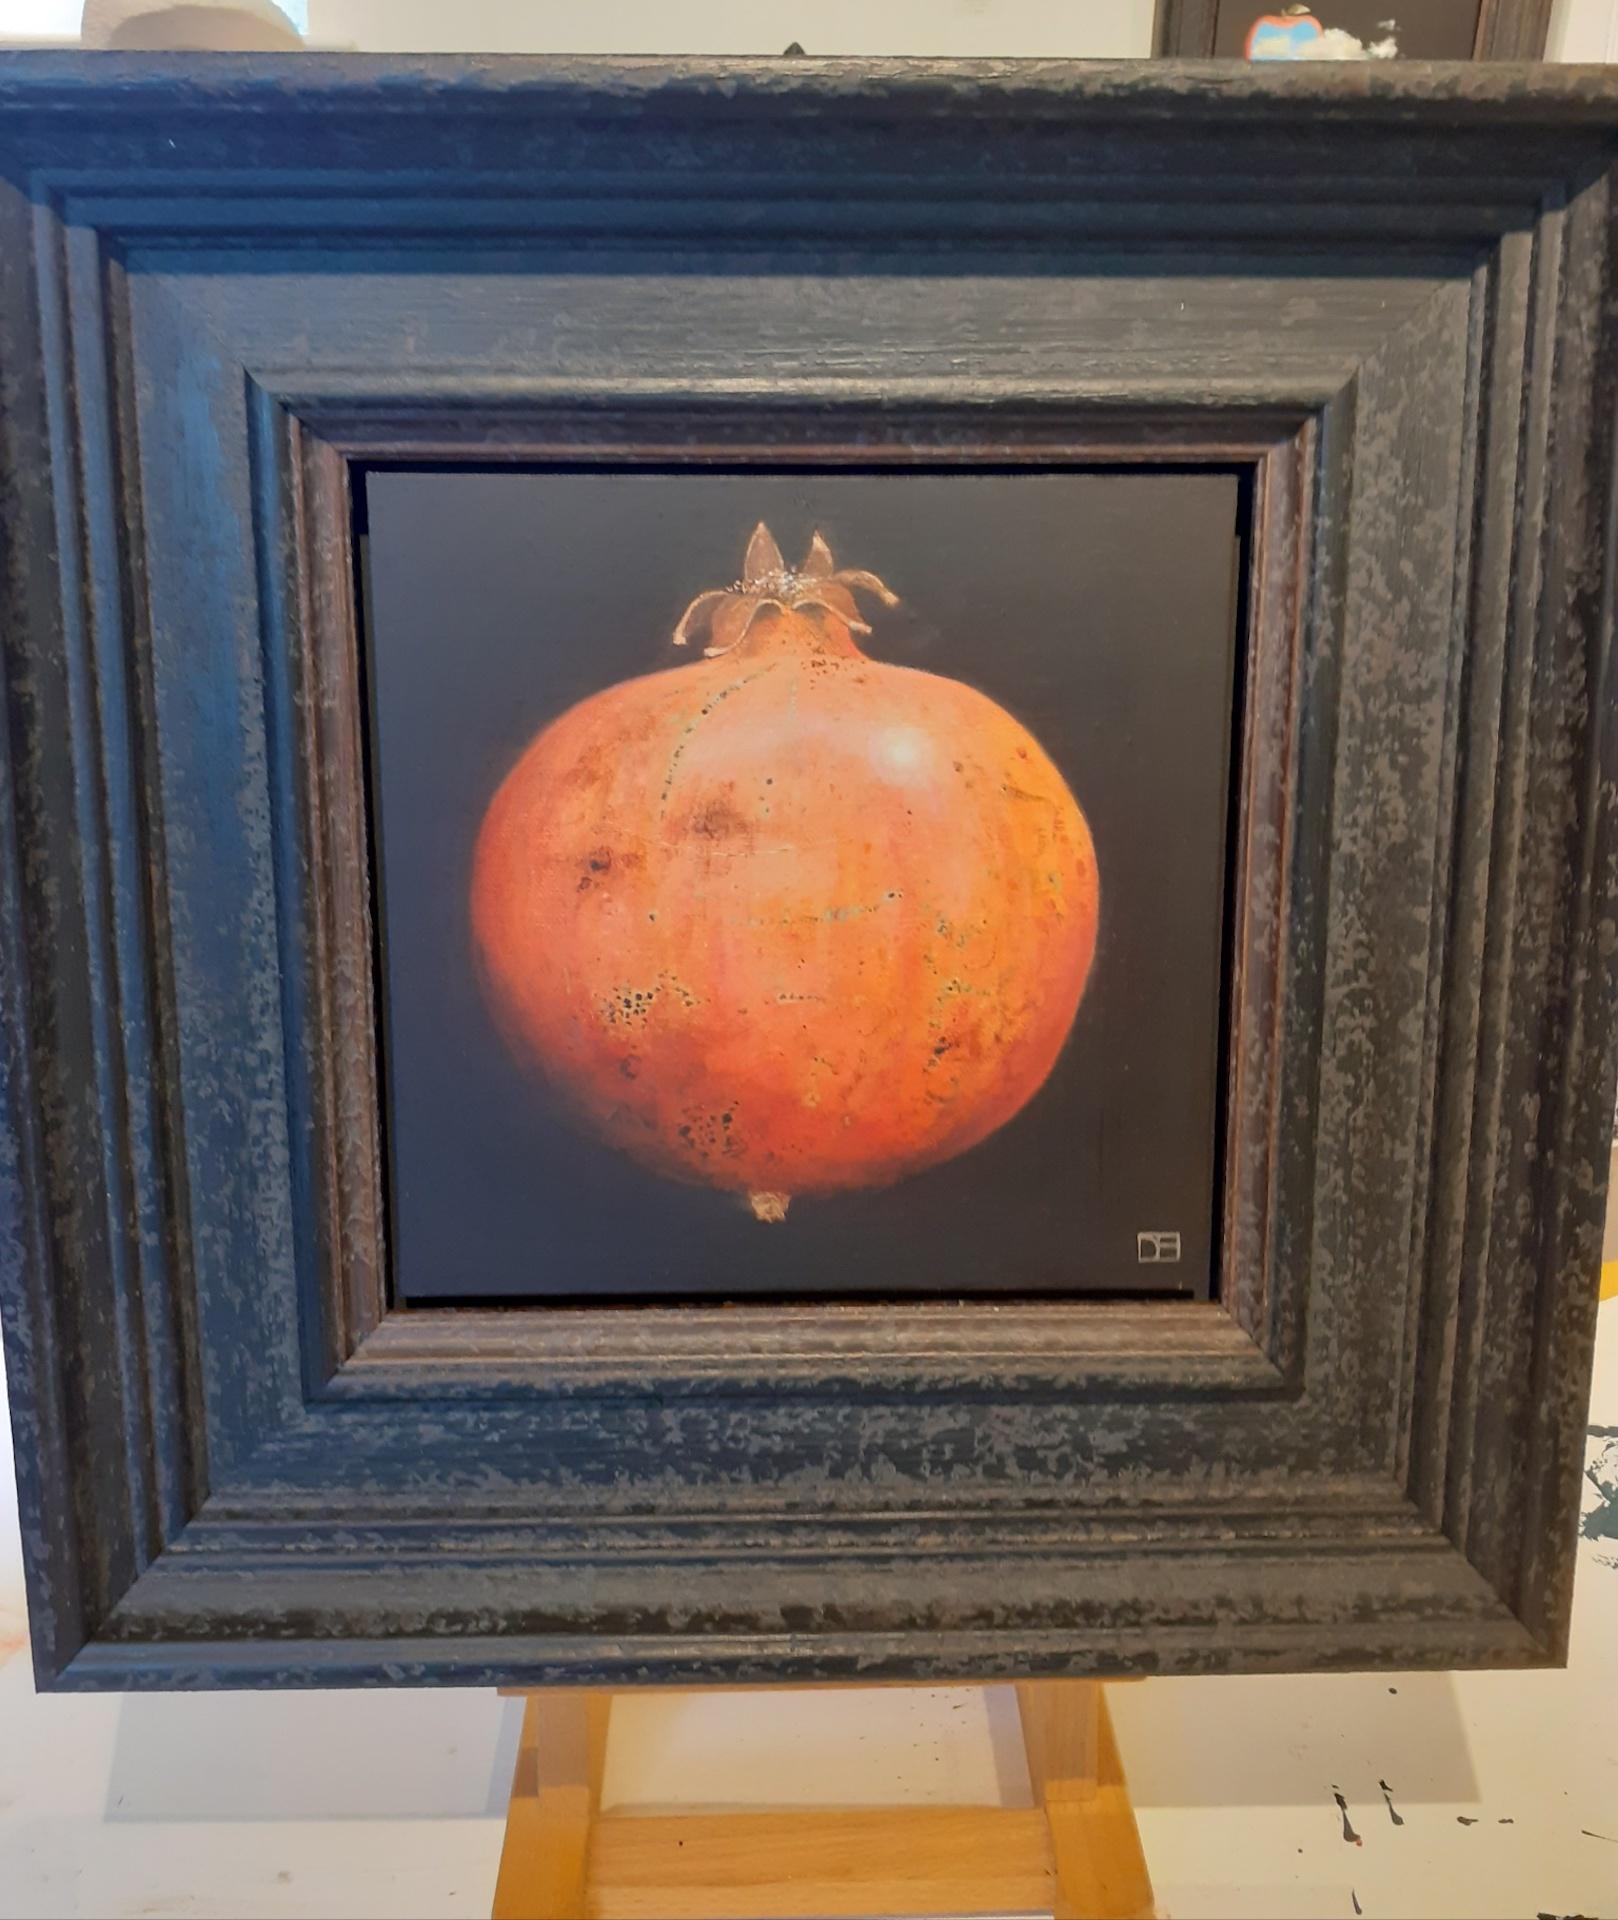 Dani Humberstone
Pomegranate
Original oil painting, still life, fruit
Oil paint on canvas
Sheet/Canvas Size: 20 cm x 20 cm x 1 cm
Framed Size: 31 cm x 31 cm x 4 cm
Sold Framed (Dark textured wood frame)
Free Shipping
Please note that insitu images